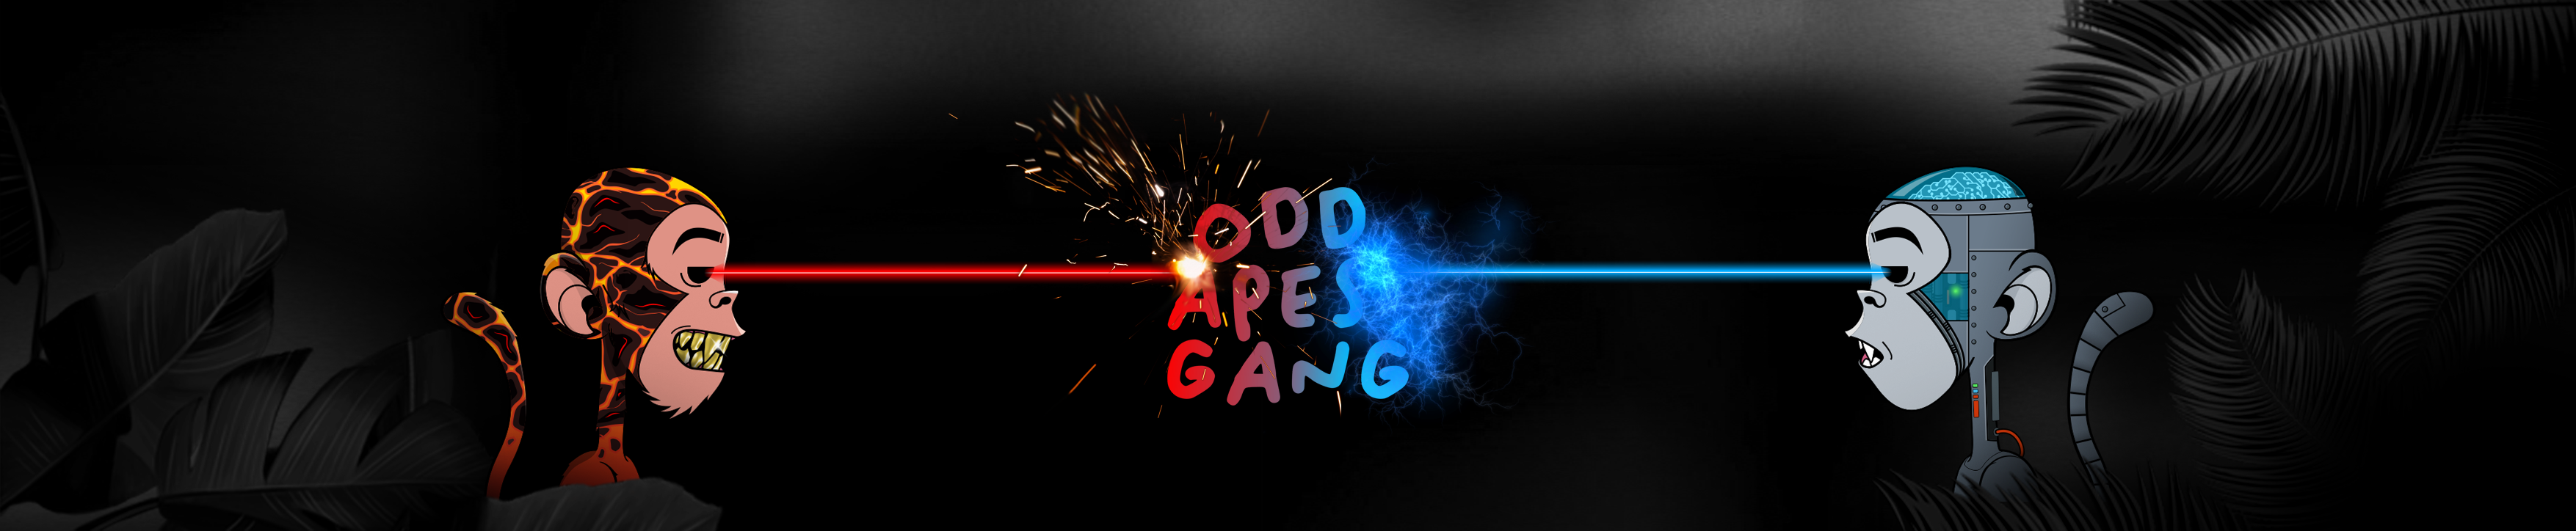 Profile banner of collection OddApesGang